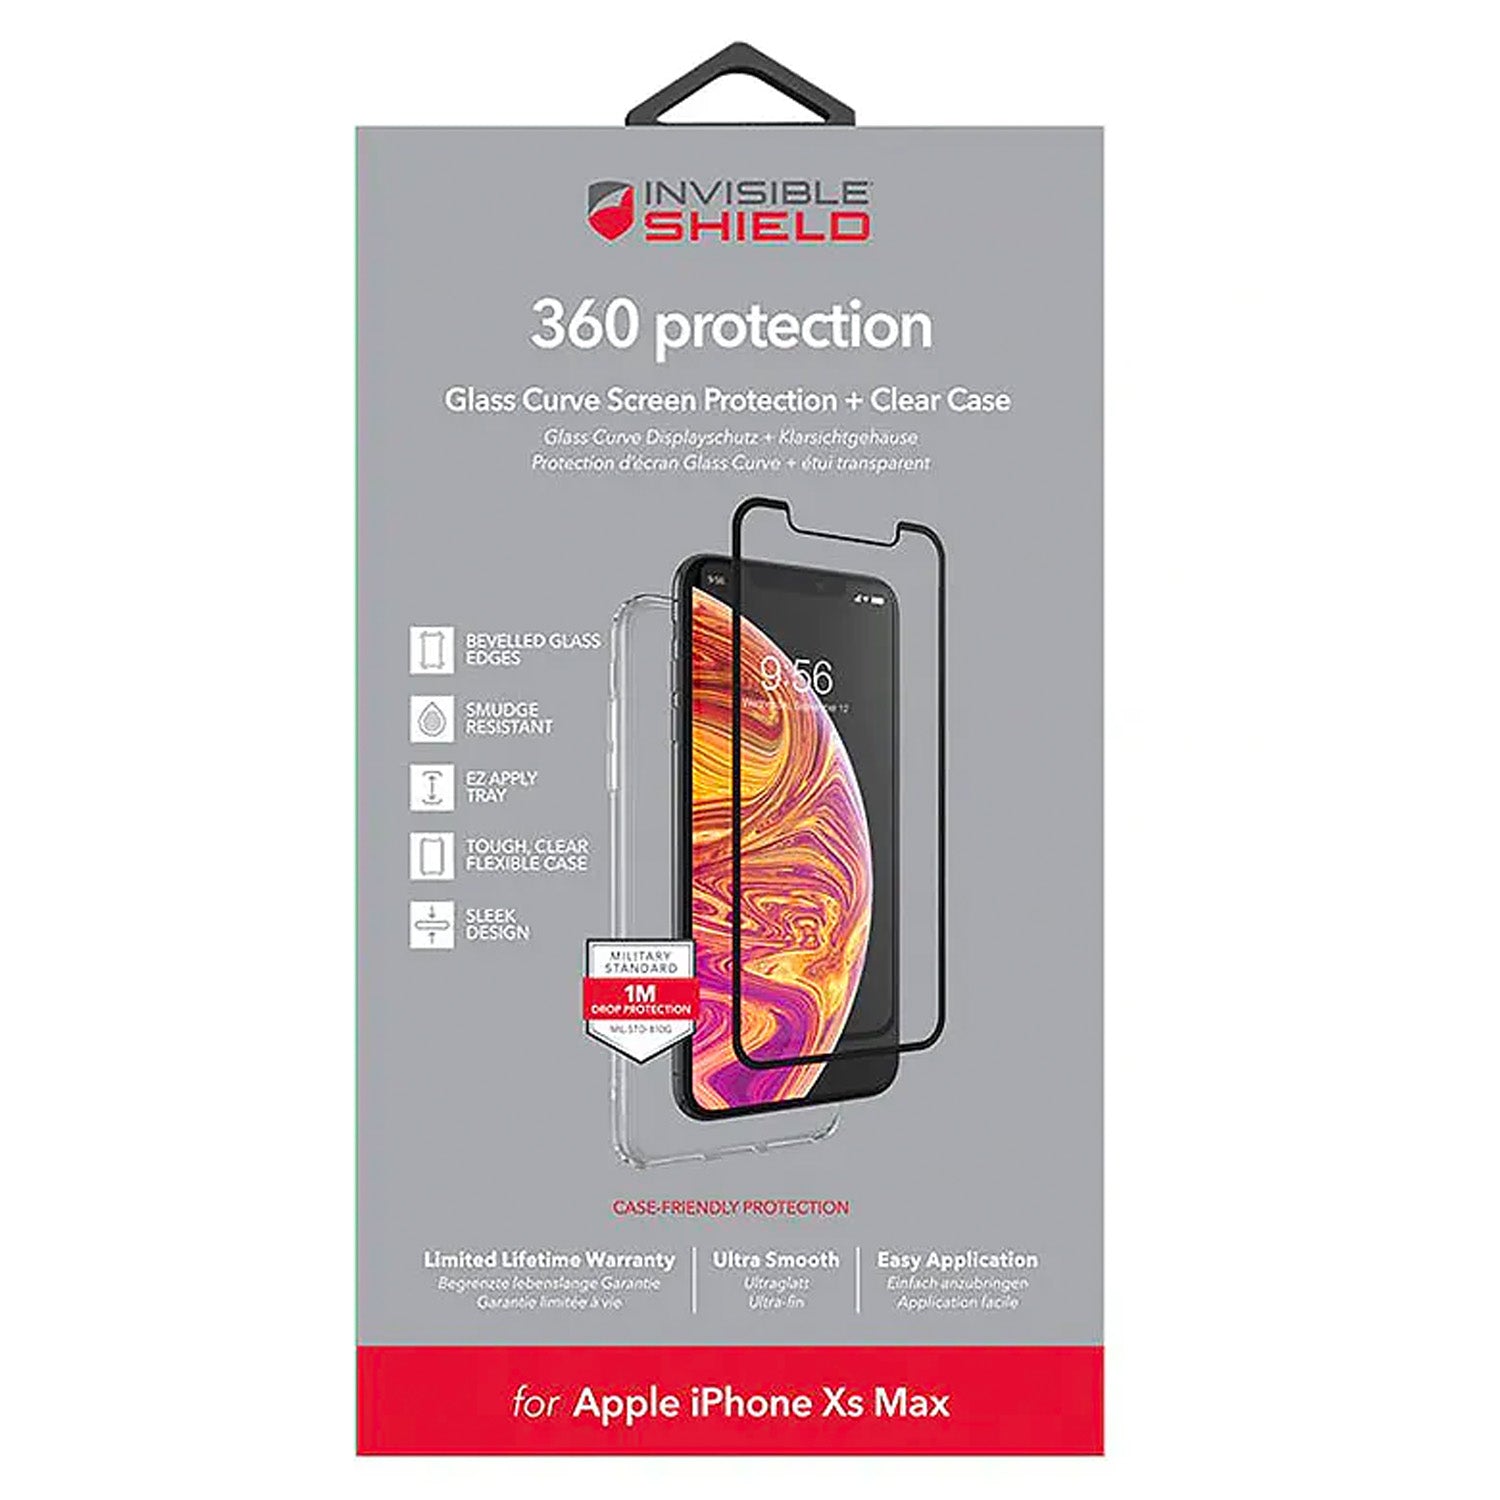 ZAGG InvisibleShield iPhone Xs Max 360 Protection Case + Glass Curve Screen Protector